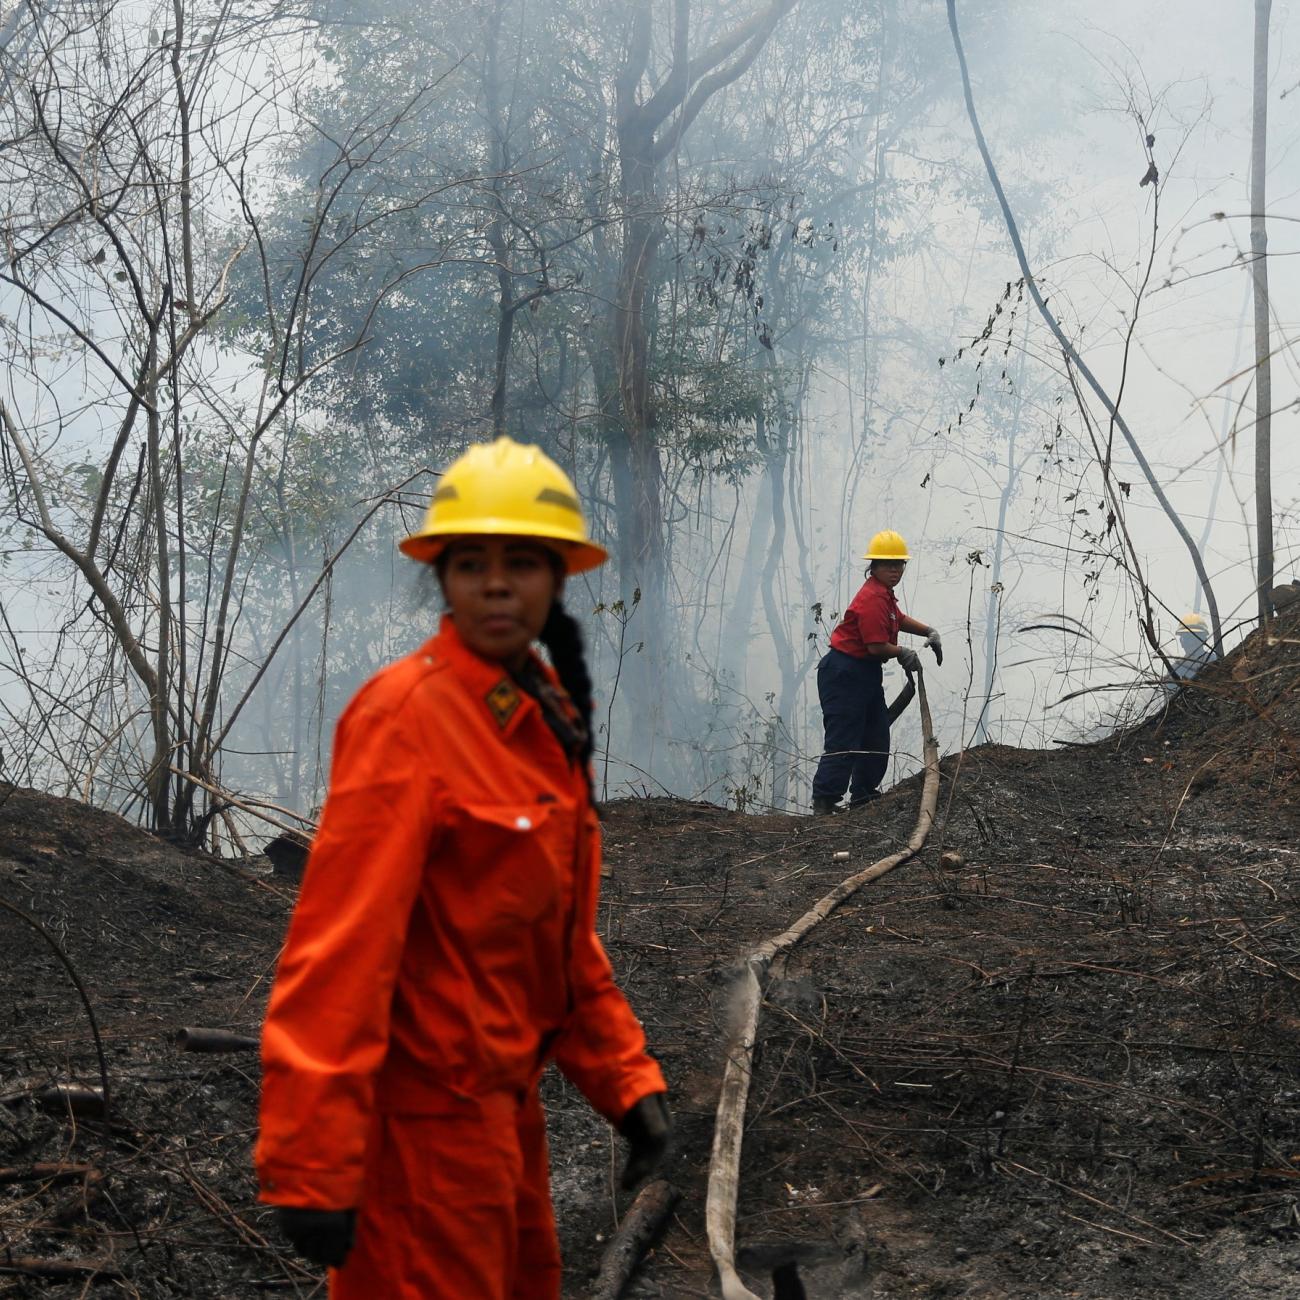 Volunteers of the Central University of Venezuela firefighter brigade battle a wildfire in Henri Pittier National Park.